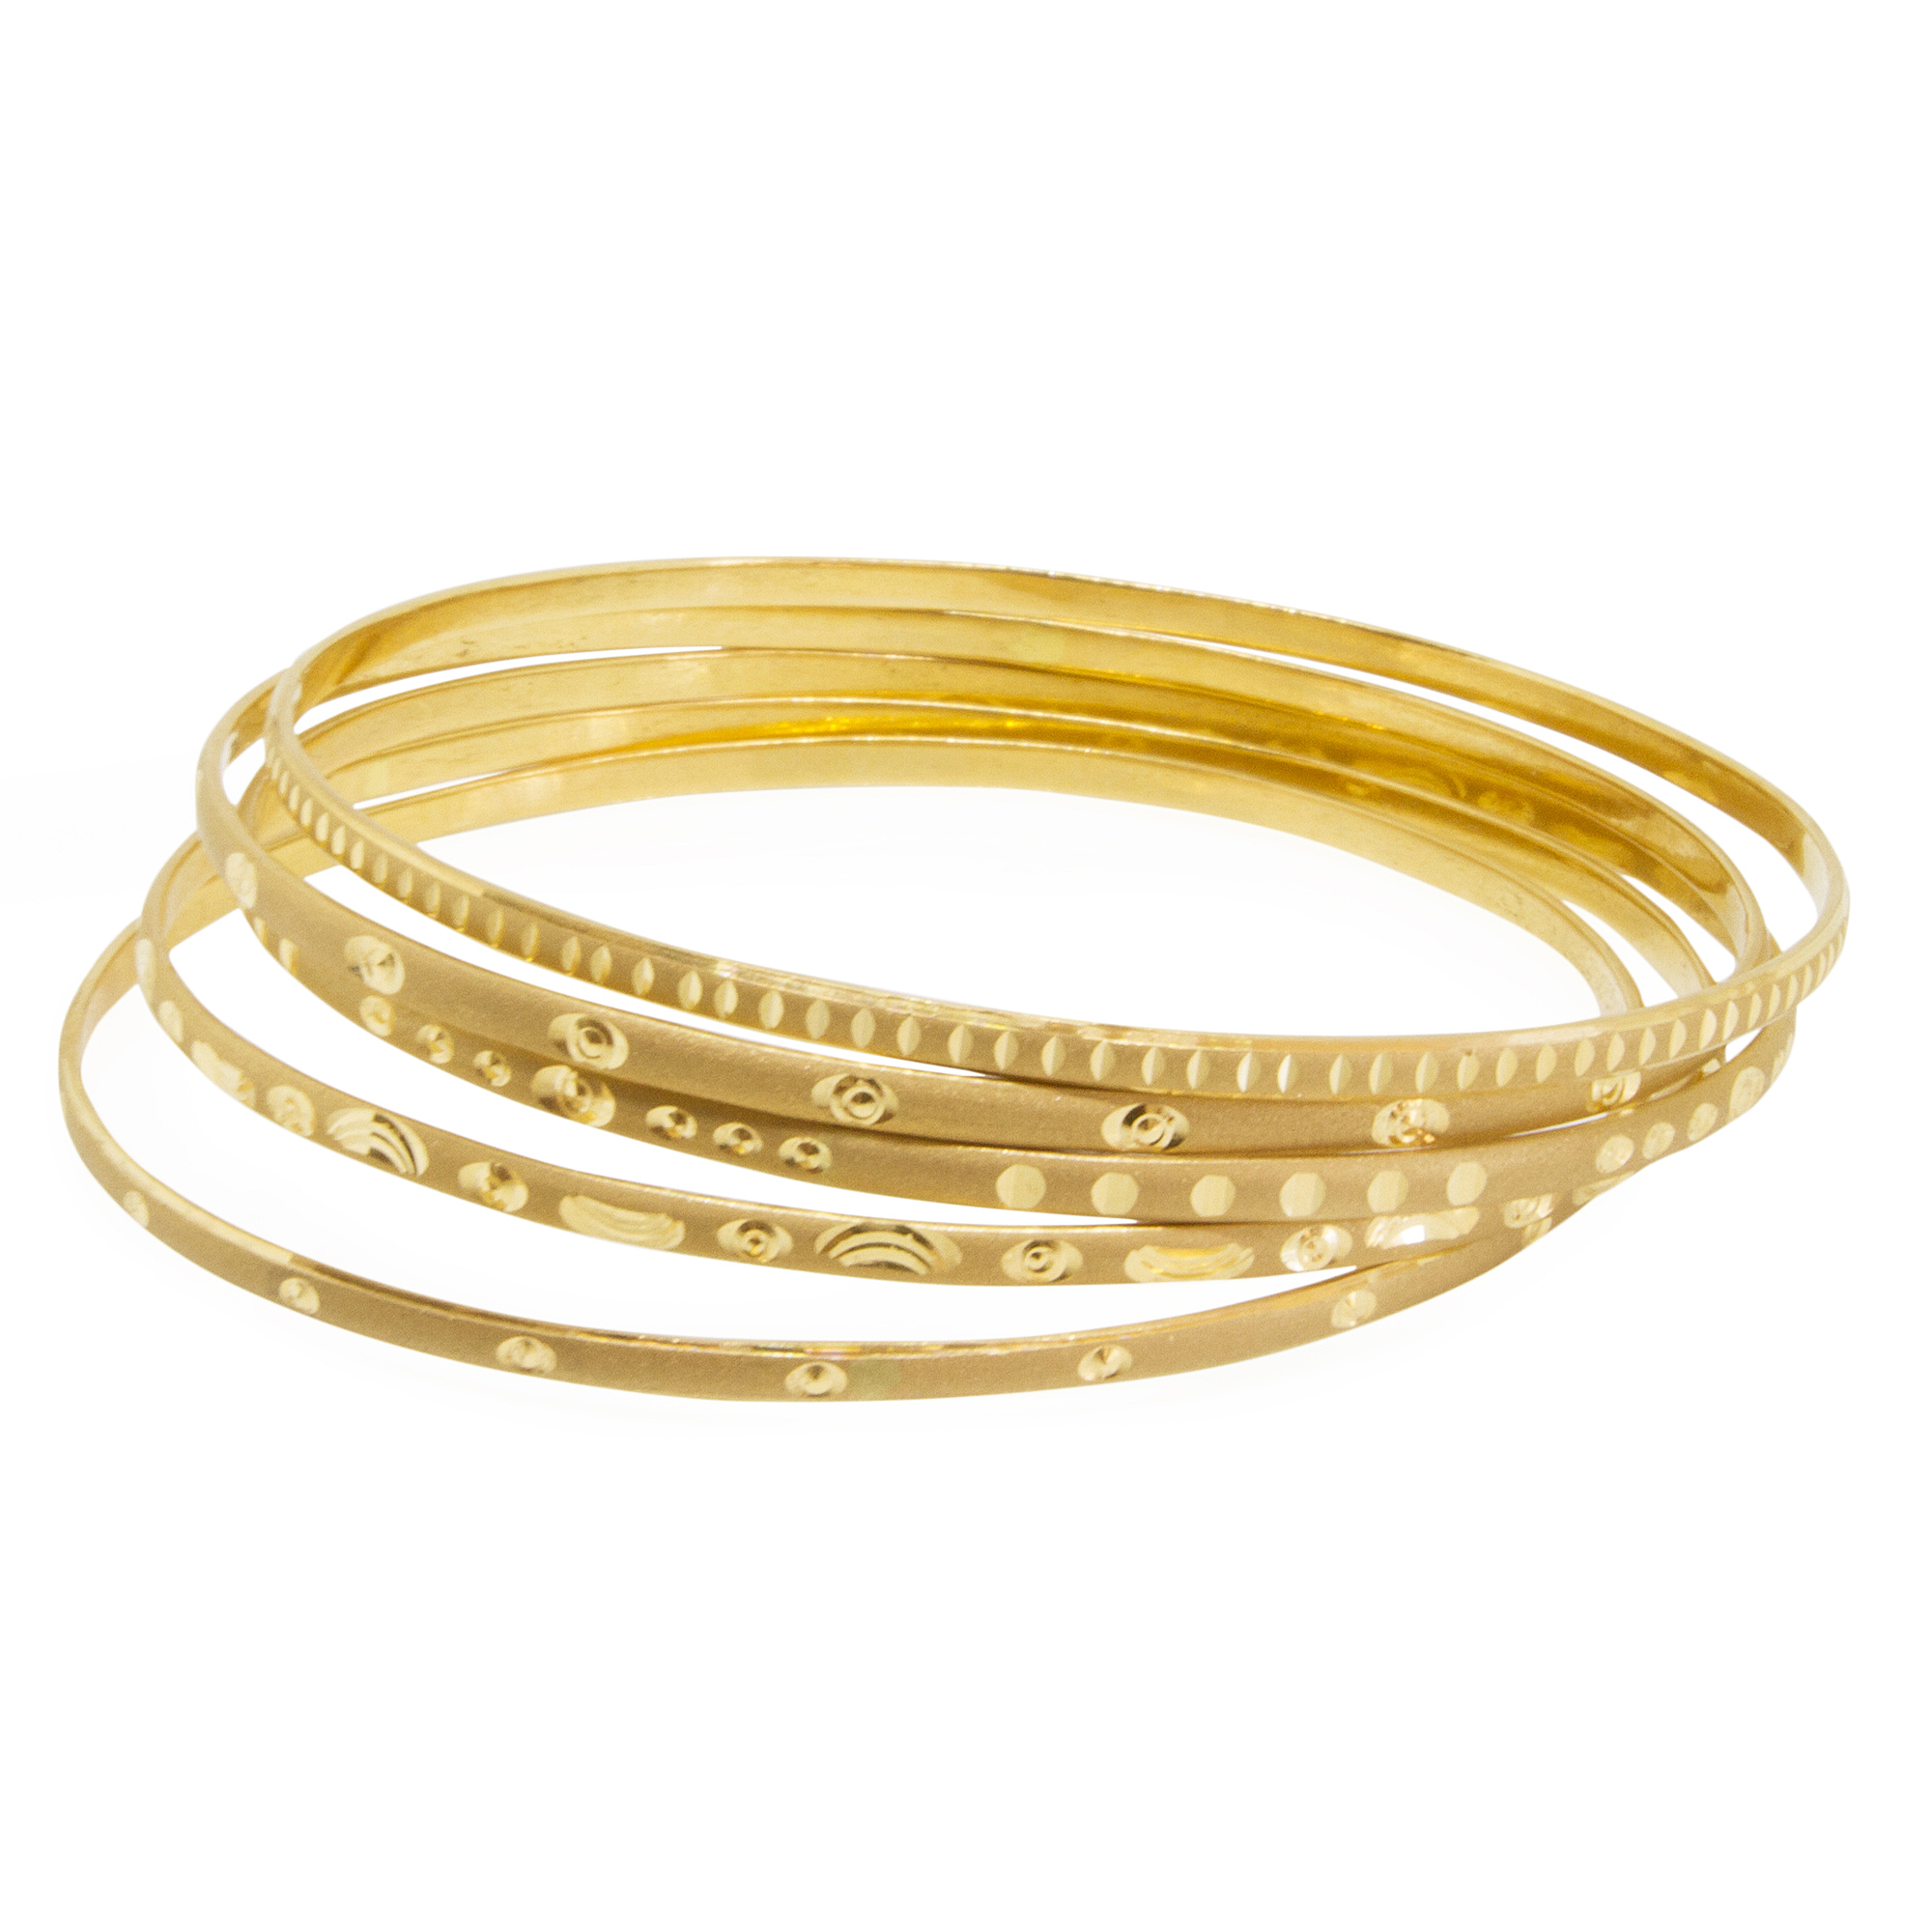 Buy Gold Without Borders Jewelry Online at GoldSilver® - goldsilver.com